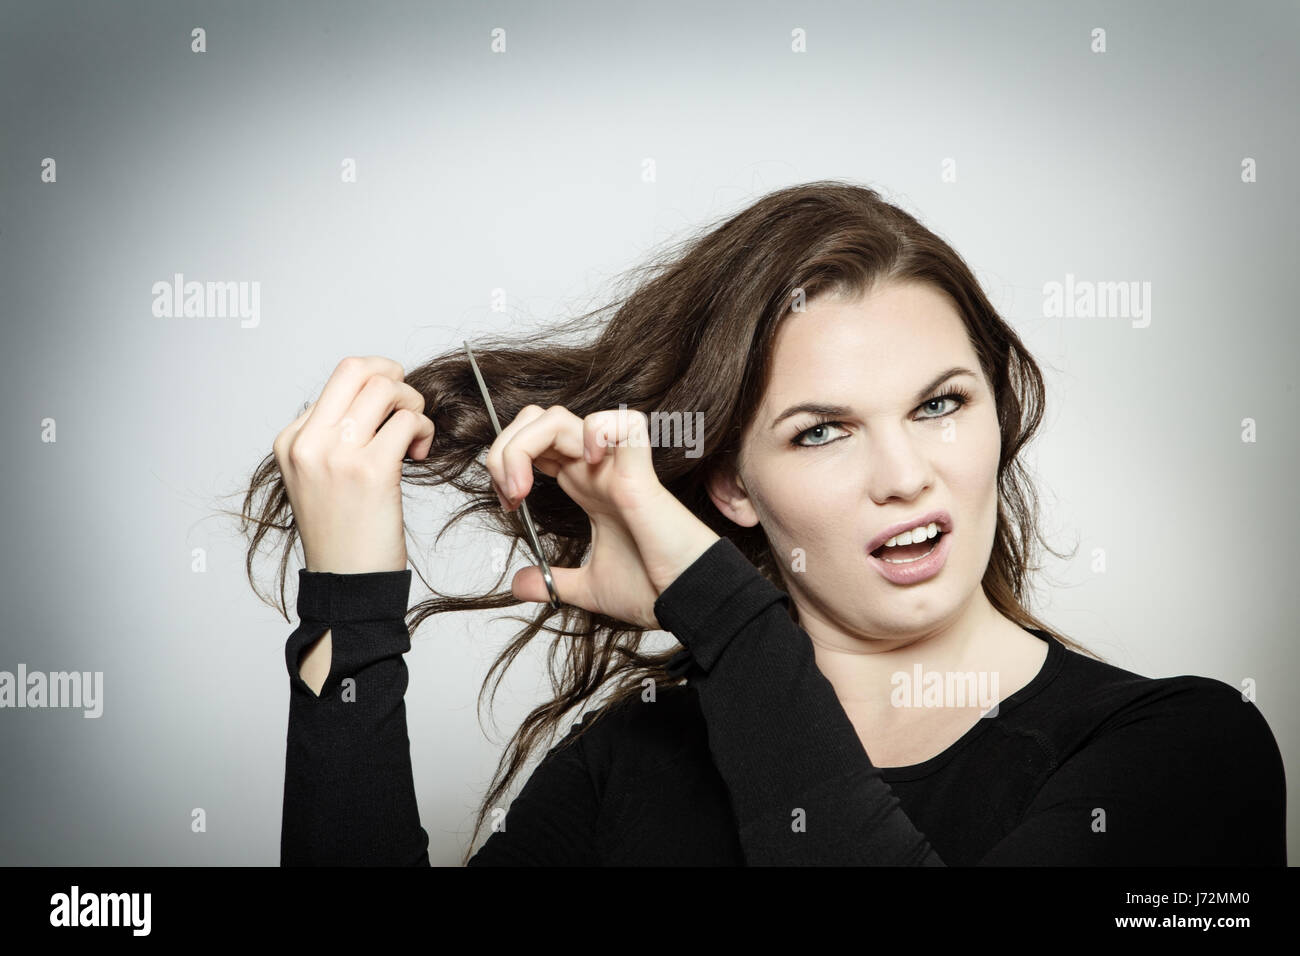 woman having a bad hair day about to cut her hair off Stock Photo